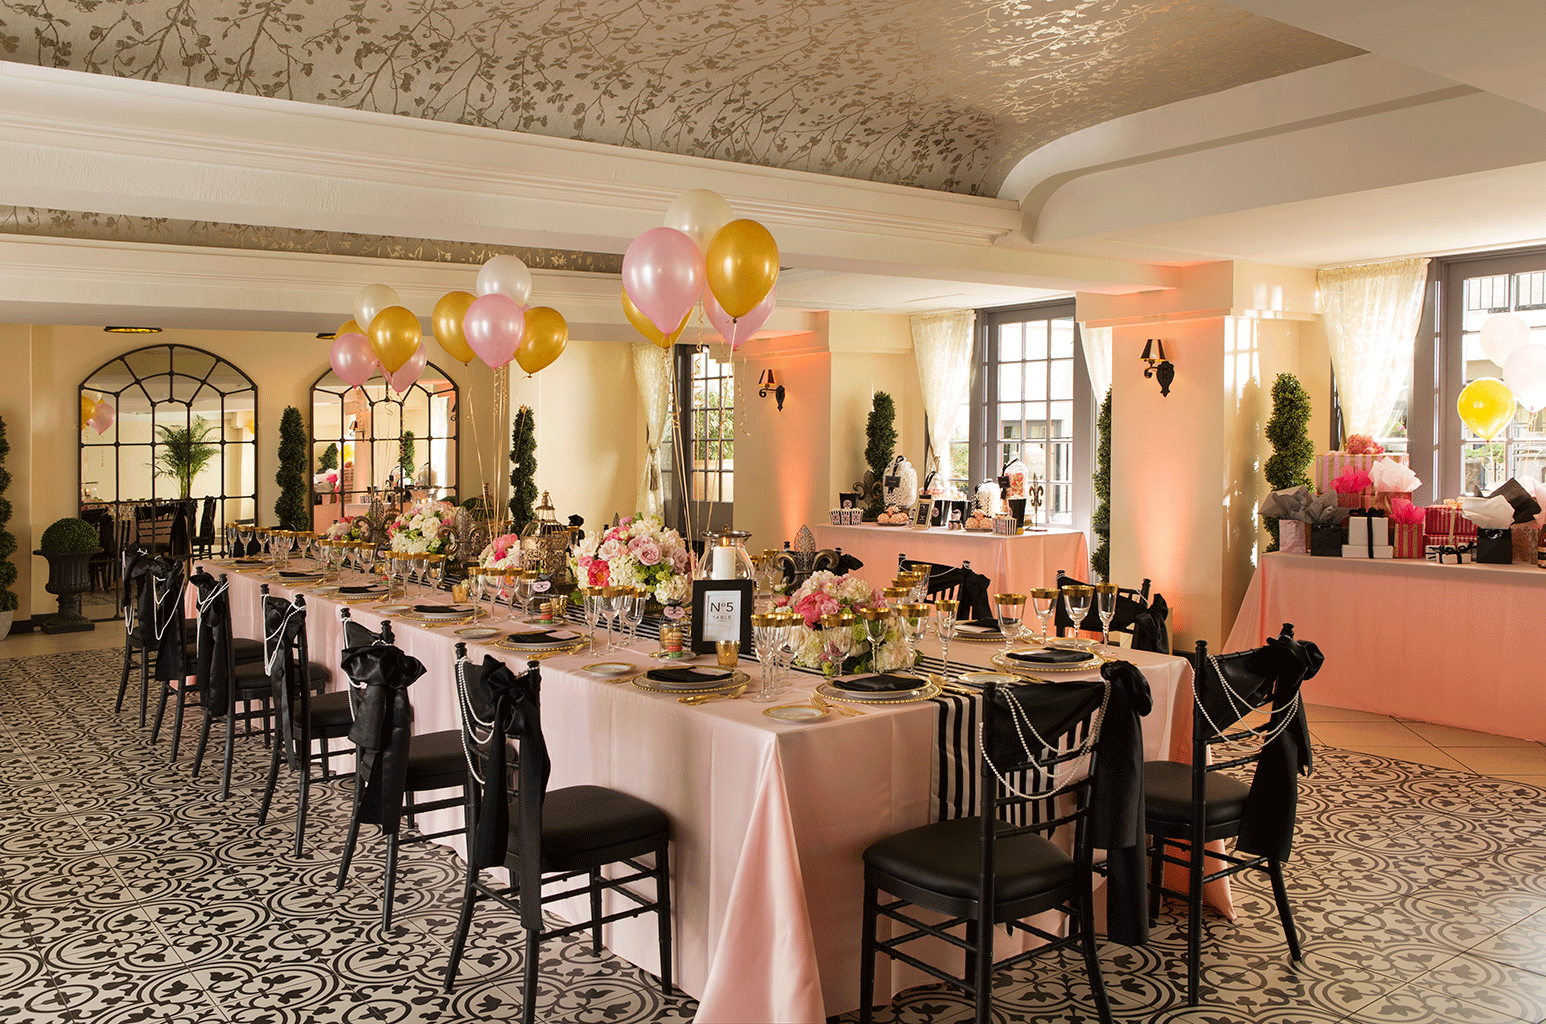 decorated ballroom with table, chairs, flowers and balloons